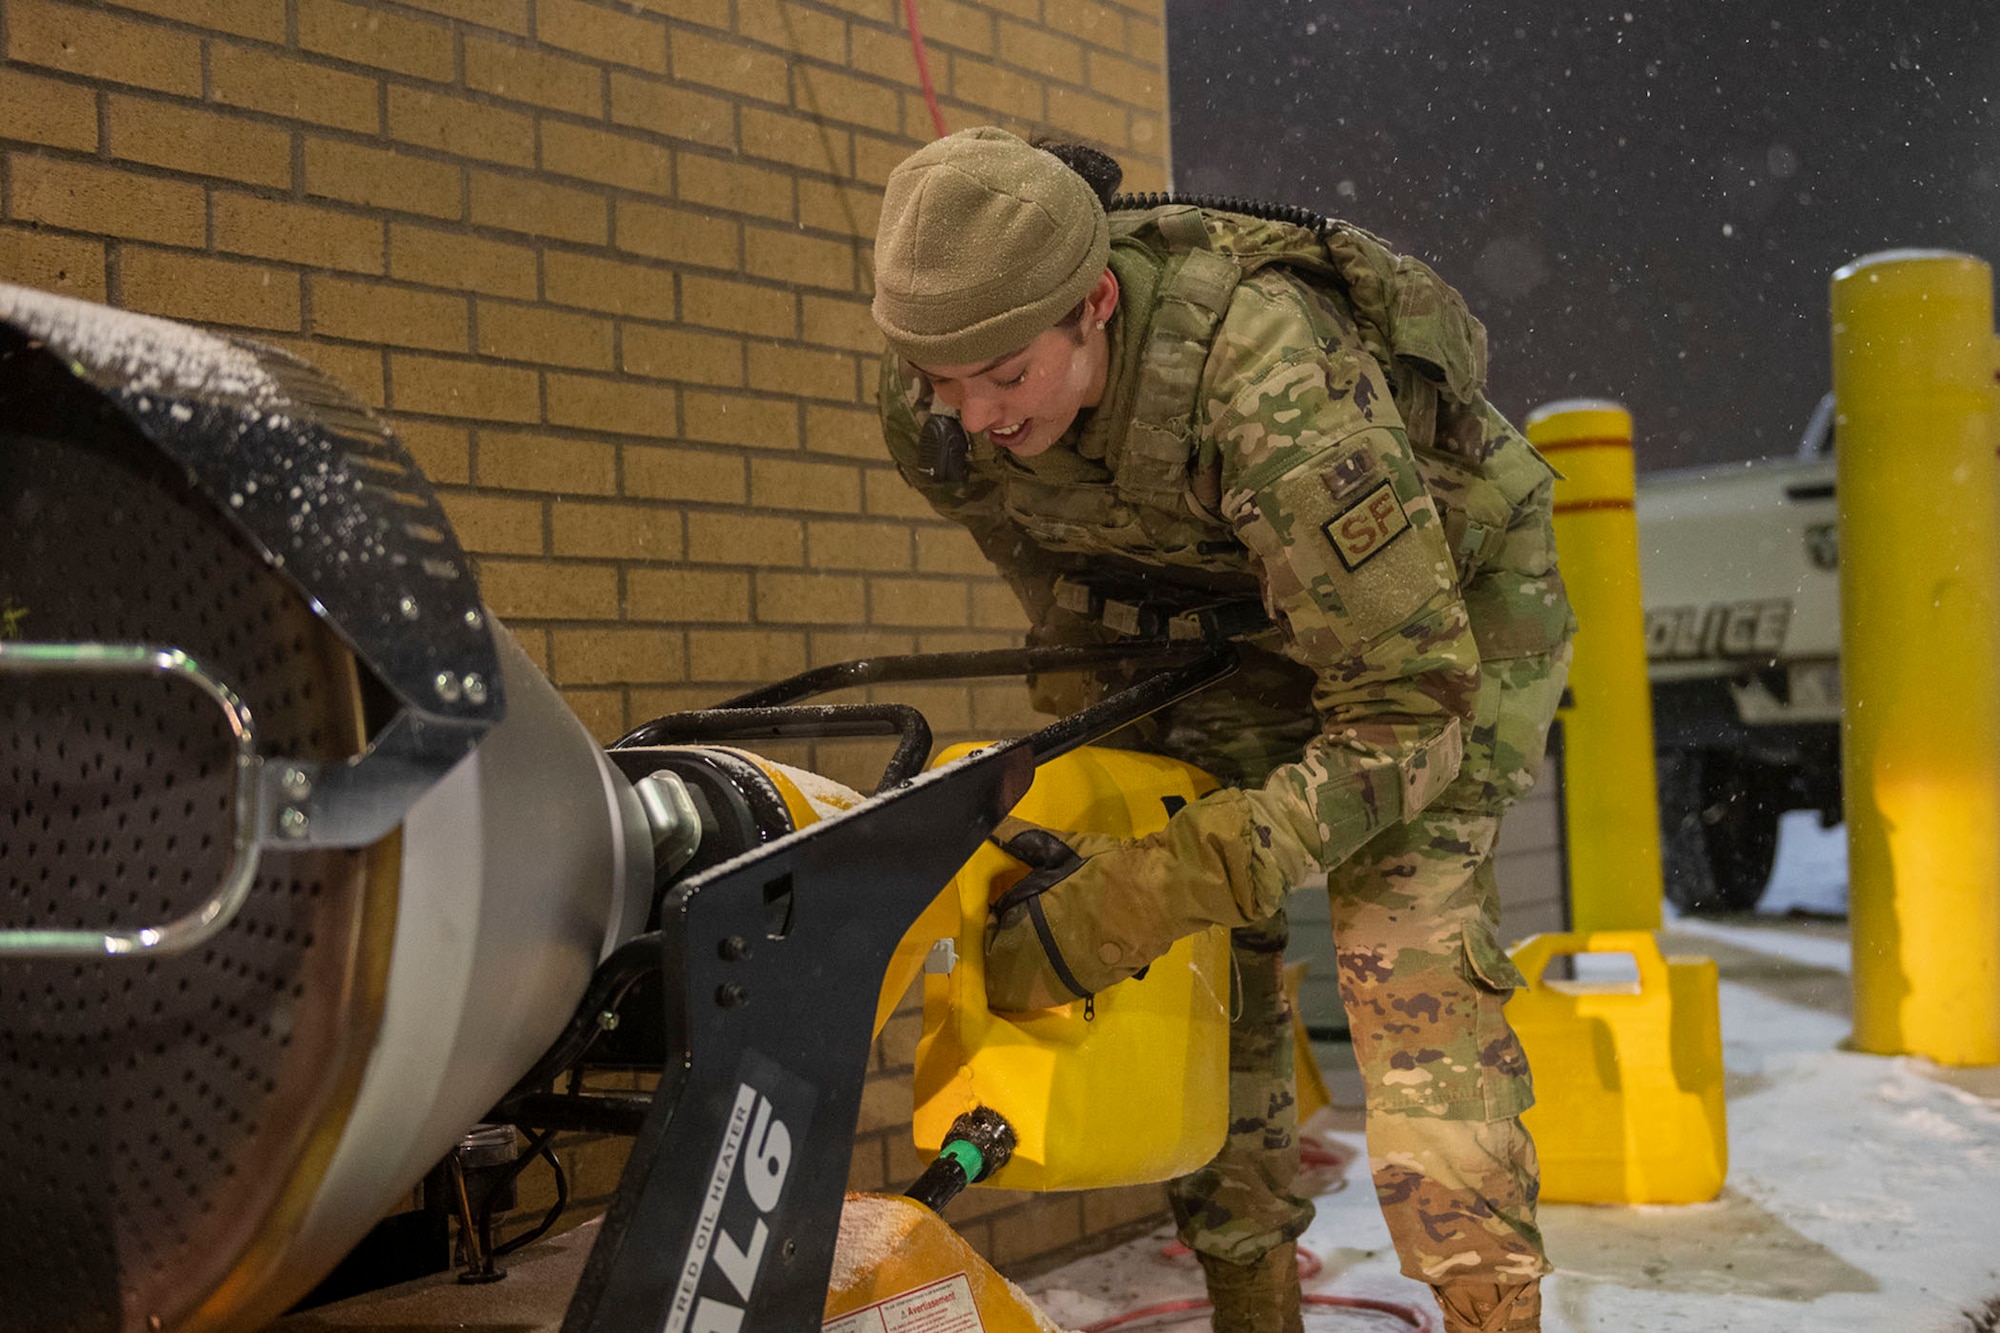 Airman 1st Class Elissa Yaag, 341st Security Forces Squadron defender refills a mobile-heater at the main gate of Malmstrom Air Force Base, Mont., due to sub-zero weather conditions, Dec. 20, 2022. Yaag and other defenders stand guard on the gate, 24/7, regardless of  dangerous weather conditions in support of Malmstrom's crucial mission. (Photo by Airman 1st Class Elijah Van Zandt)